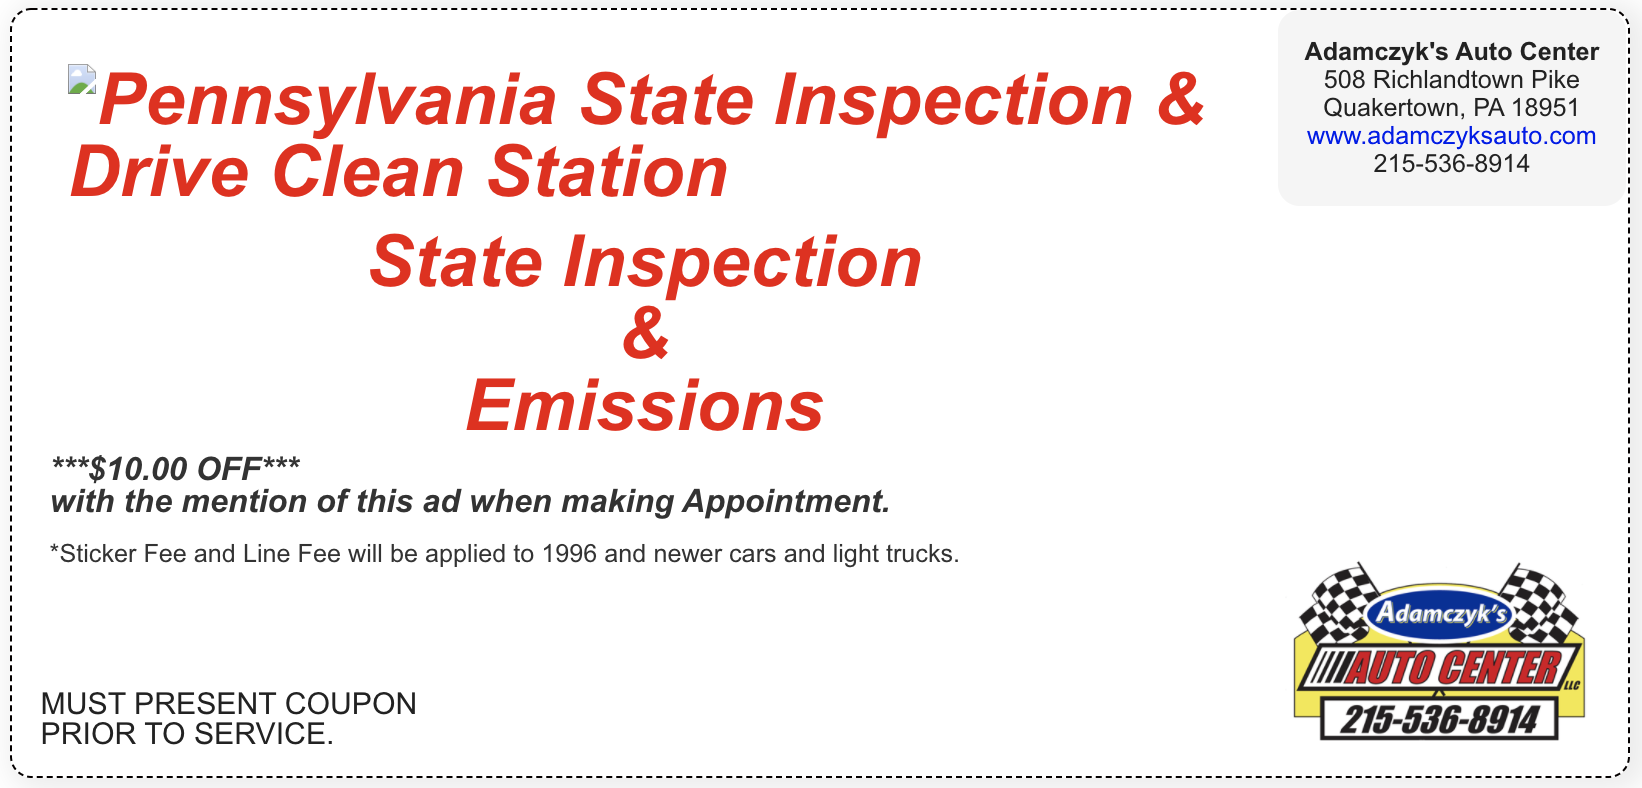 Car Inspections Near Me | Adamczyk's Auto Center ...